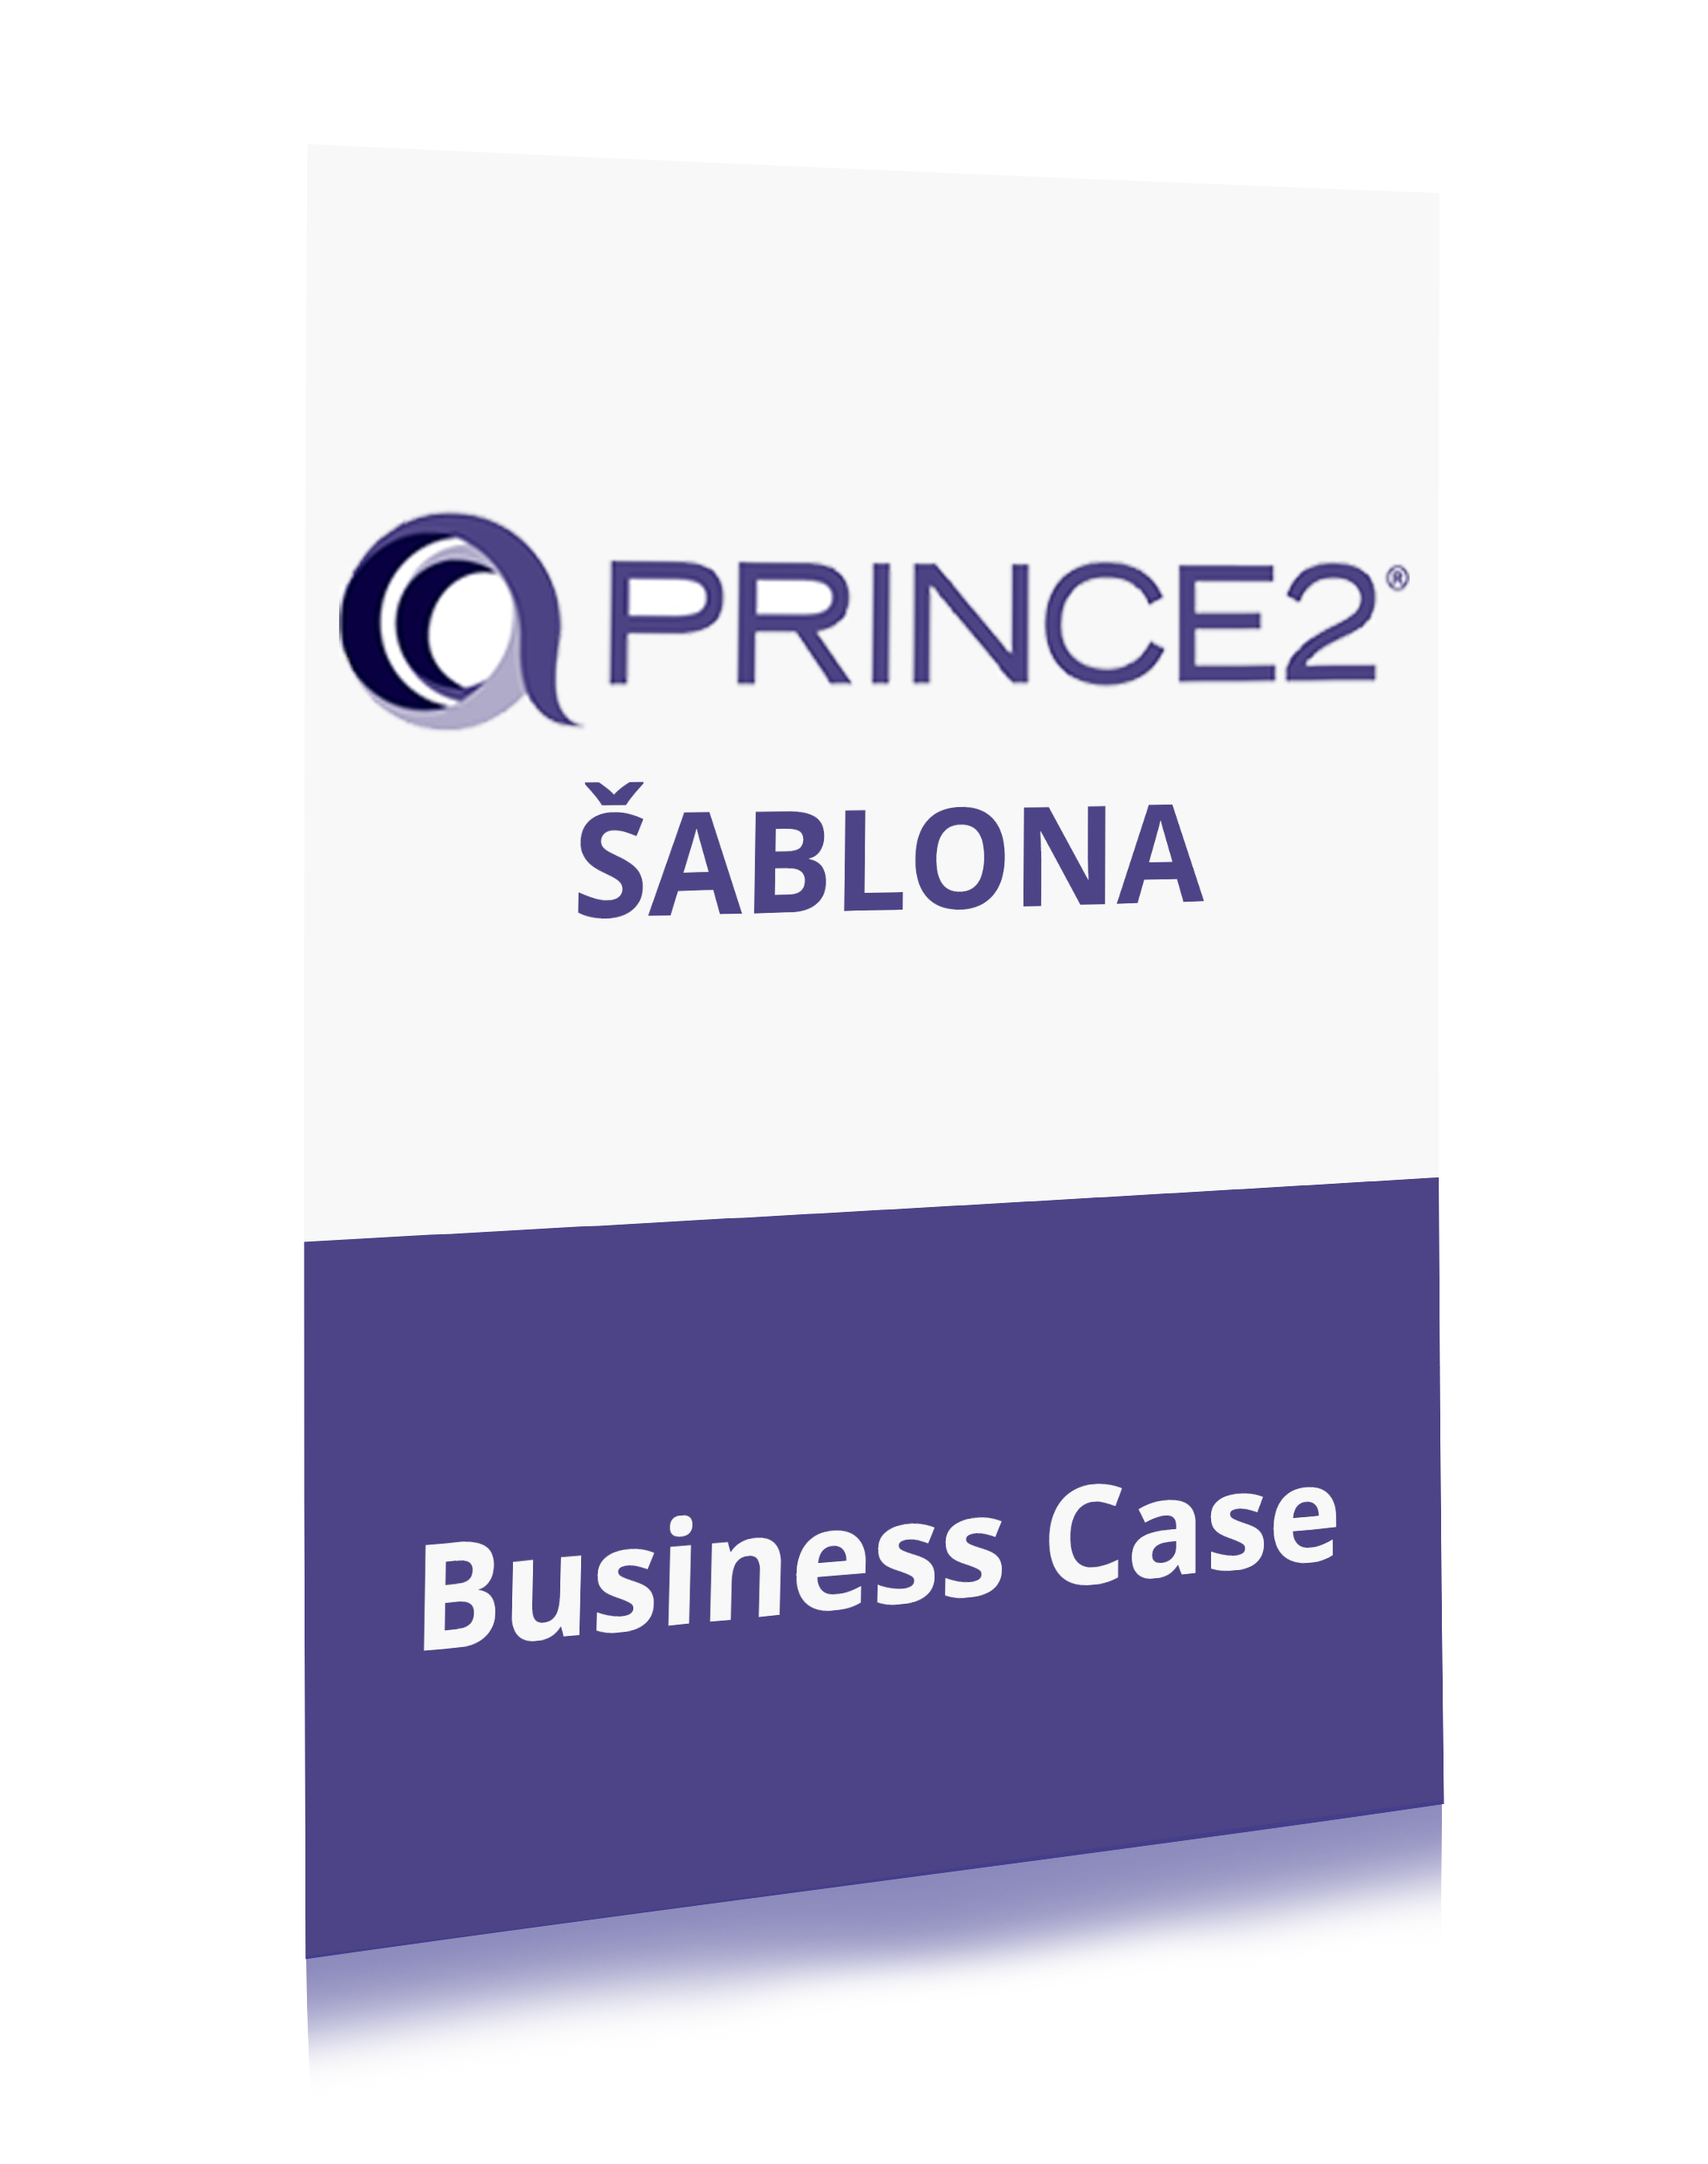 PRINCE2 Business Case